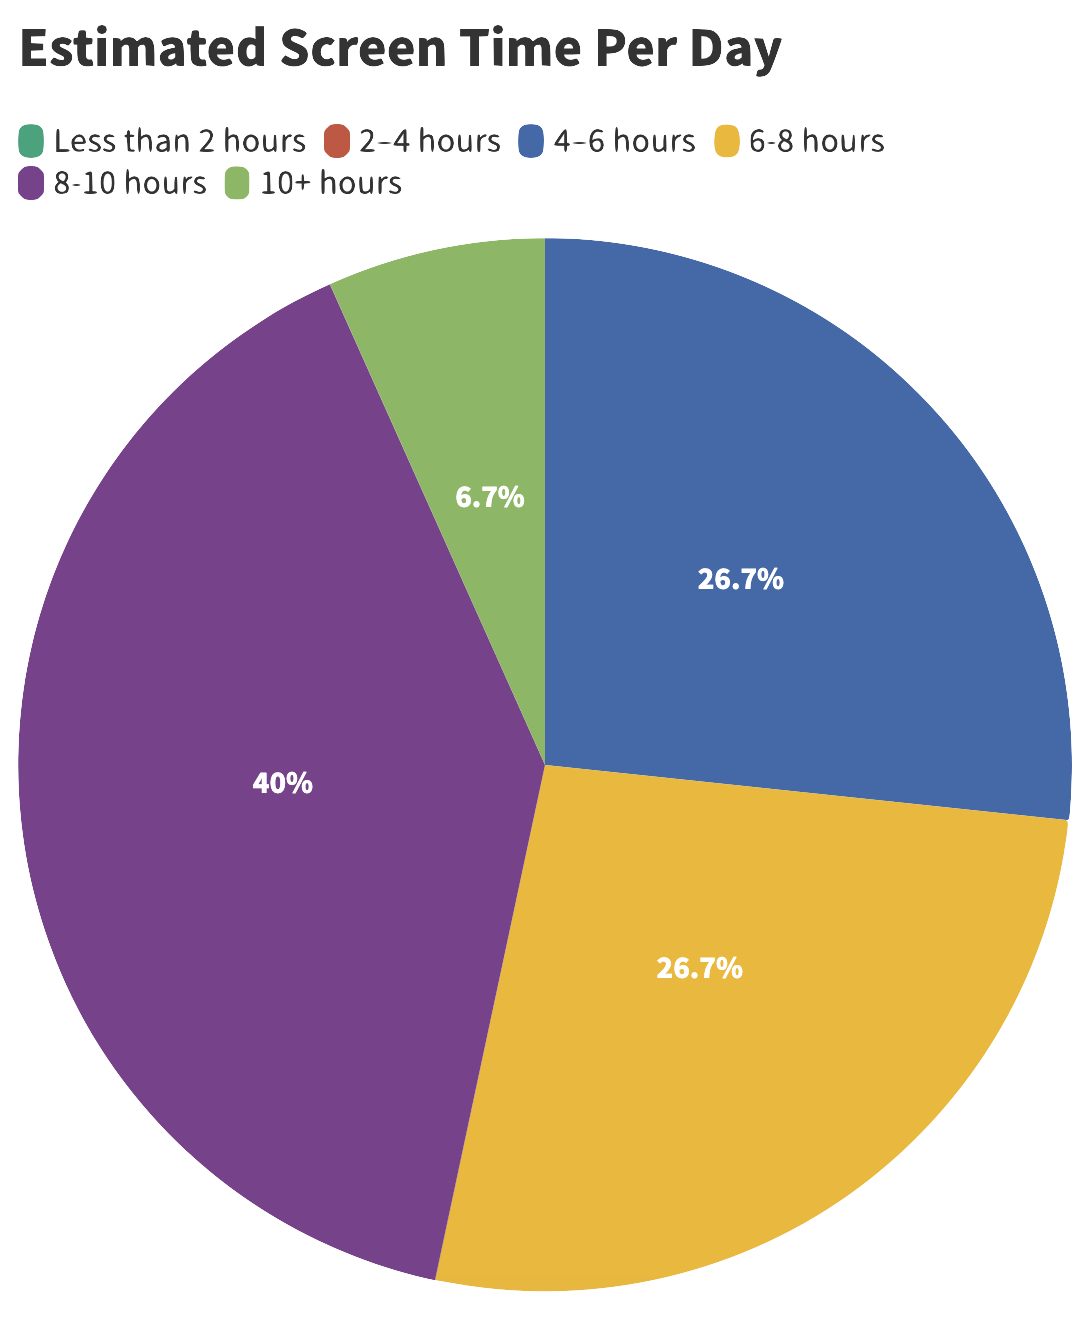 Pie chart showing fellows' self-reported estimated screen time per day. 4-6 hours: 26.7%; 6–8 hours: 26.7%; 8-10 hours: 40%; 10+ hours: 6.7%